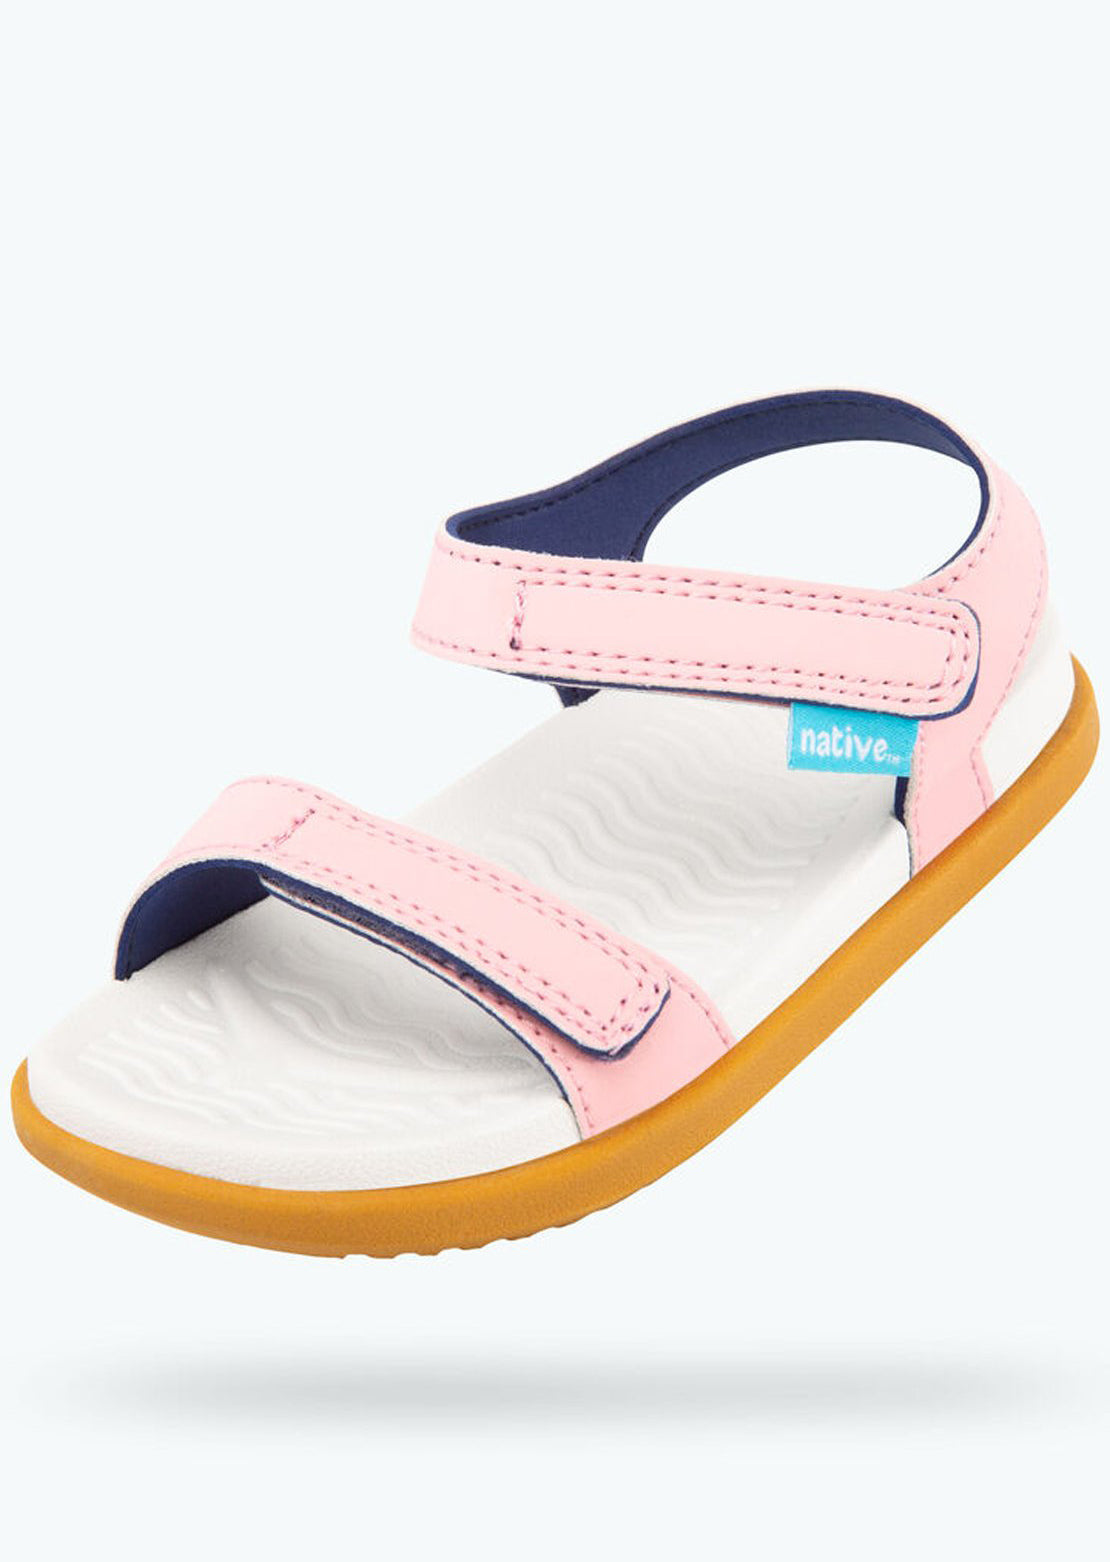 Native Junior Charley Sandals Princess Pink/Shell White/Toffee Brown 